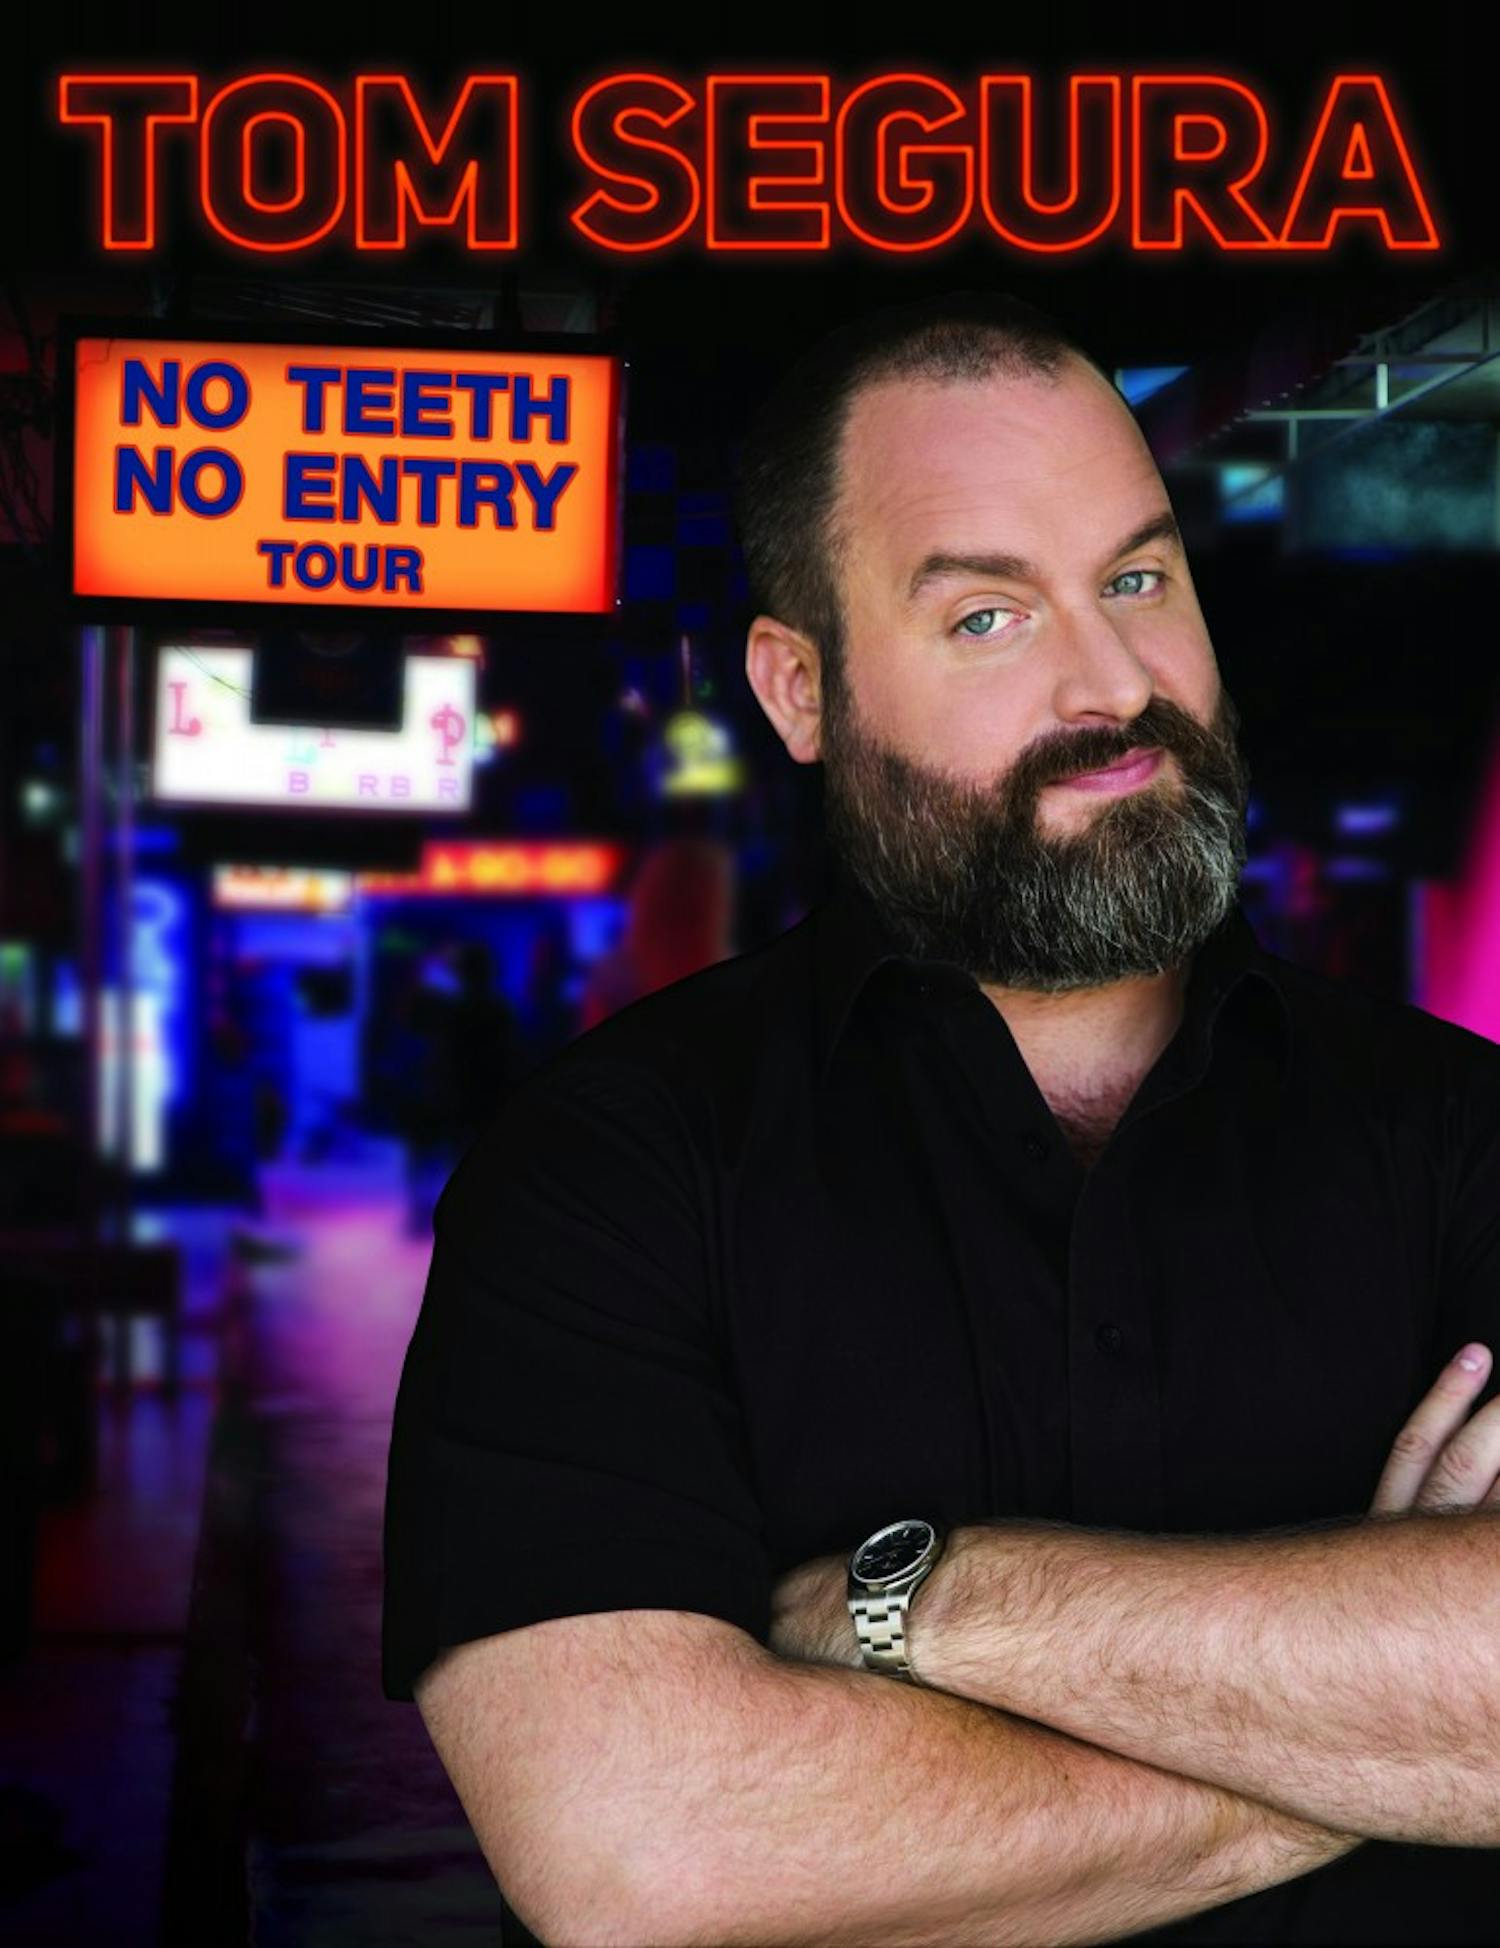 Comedian and entertainer Tom Segura will be headlining a tour stop at the Center for the Arts on Nov. 11. Segura talked with The Spectrum about his comedic style, his podcast and performing in Buffalo.